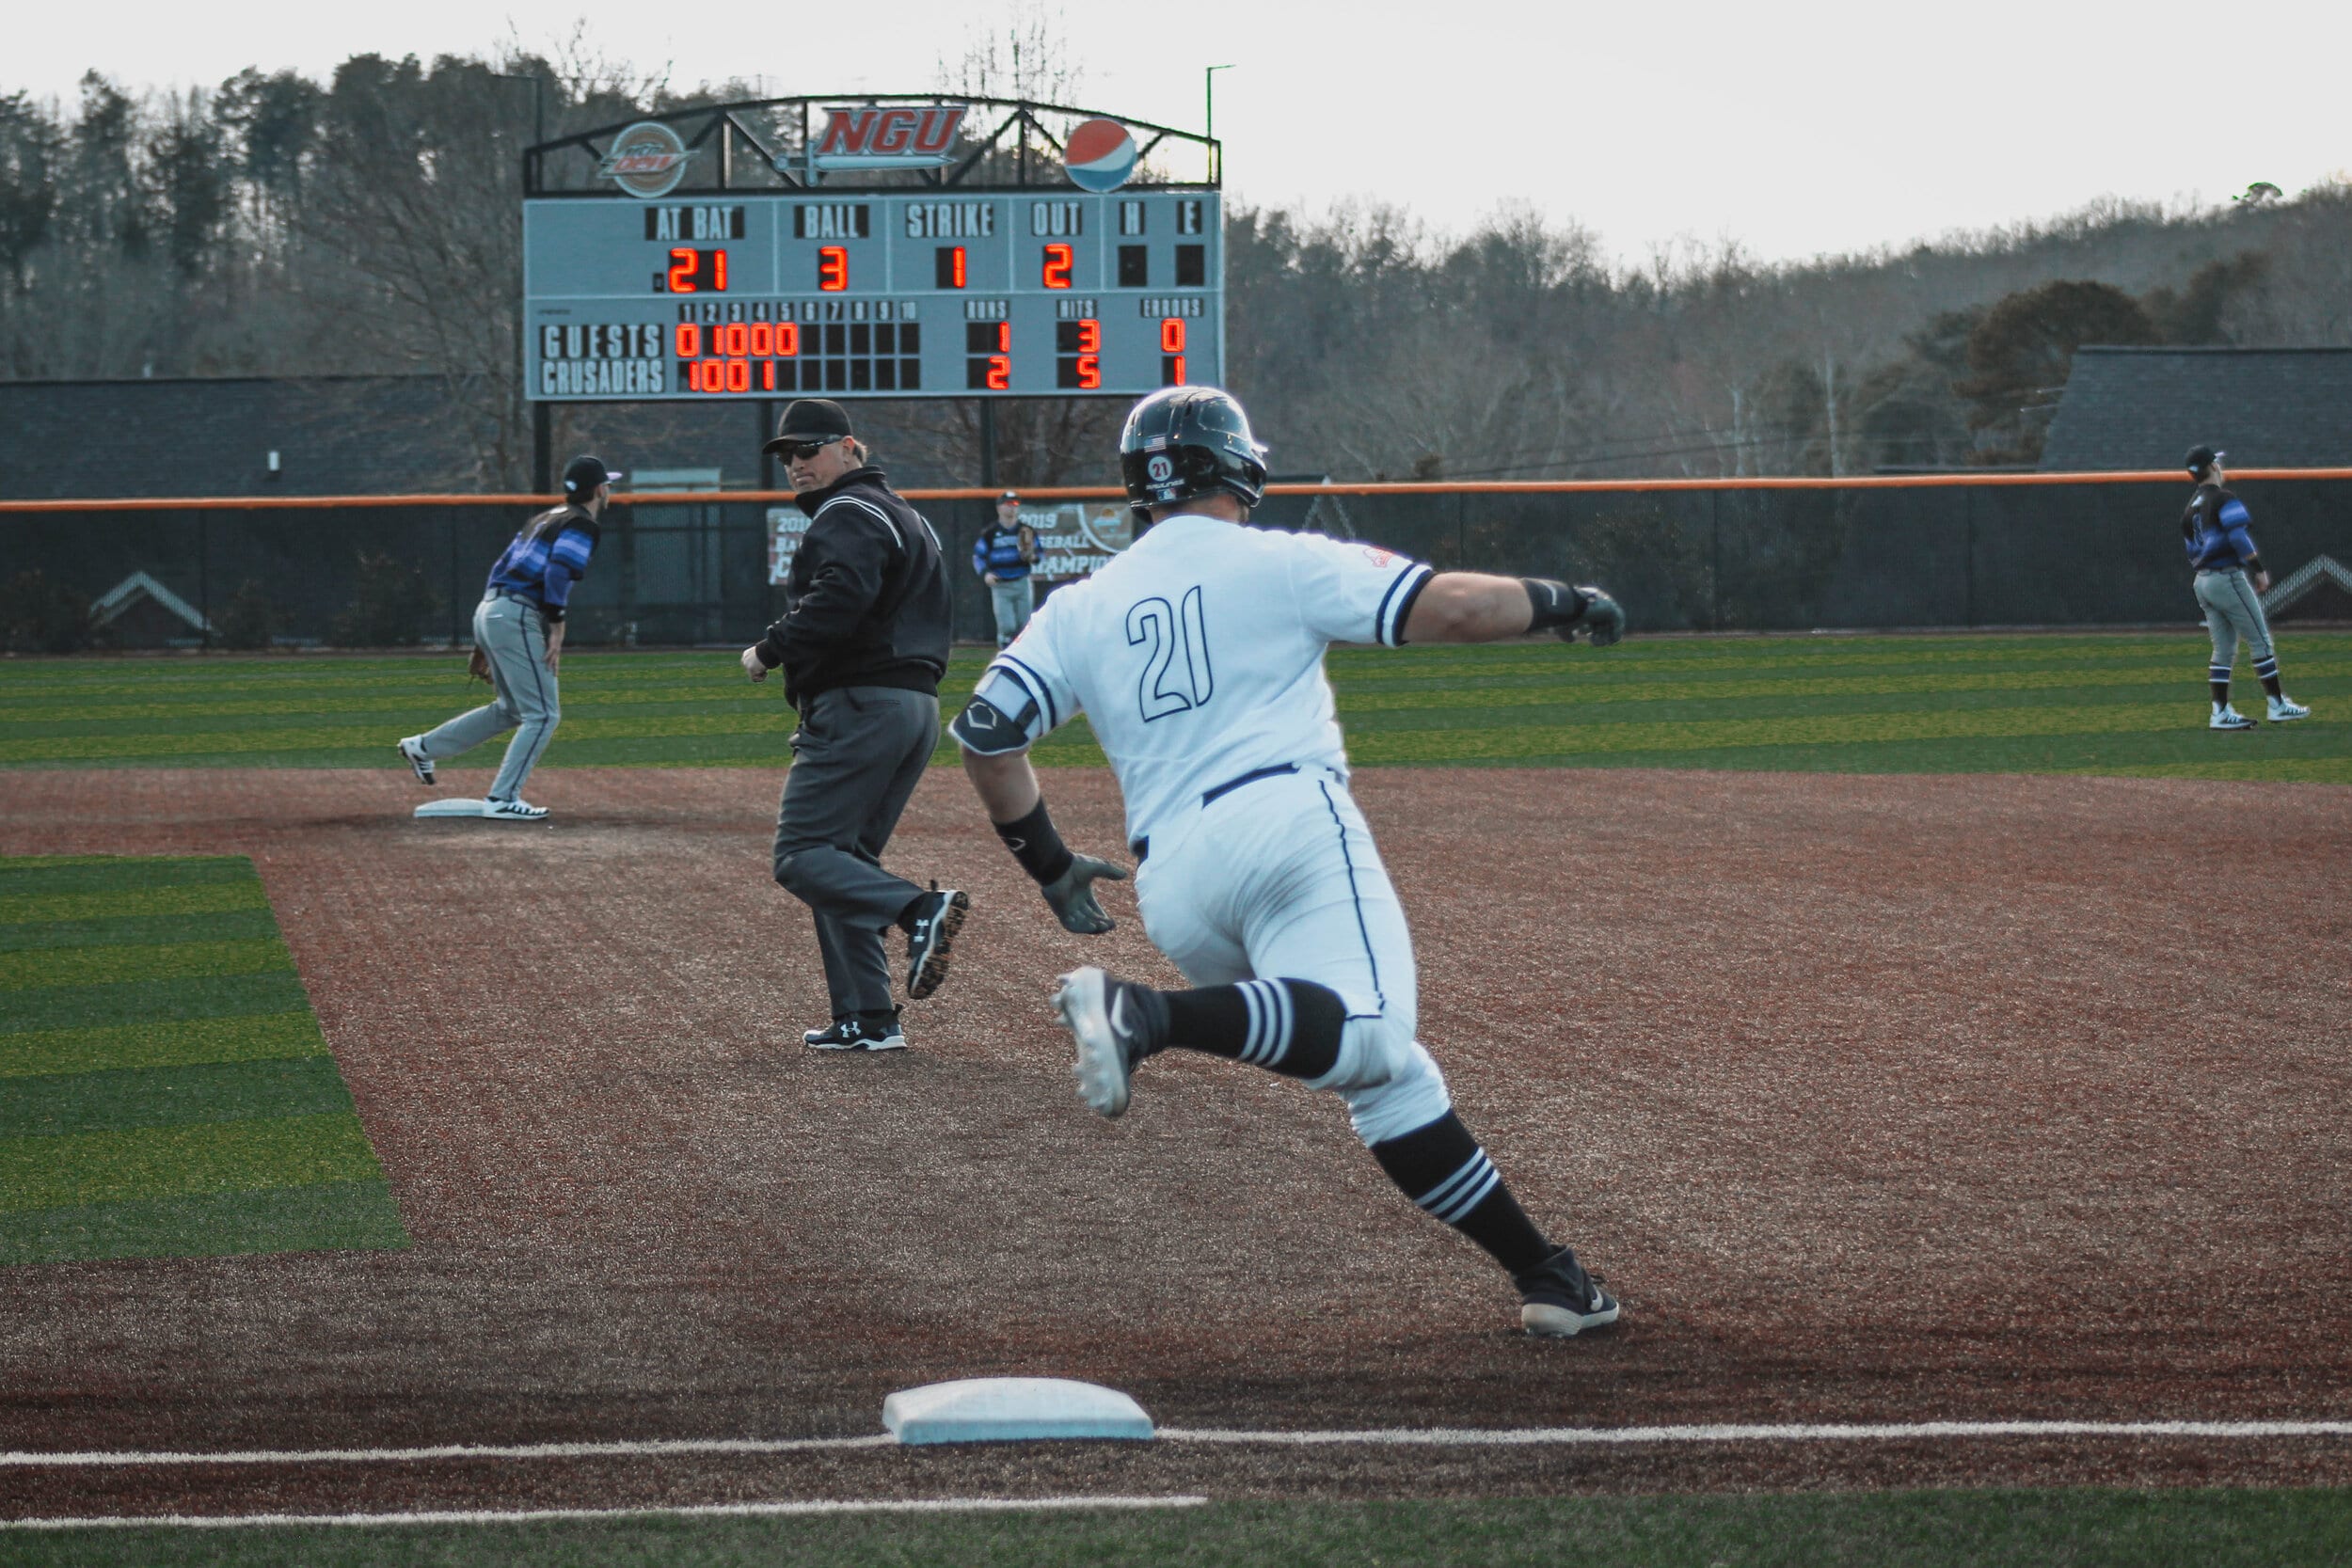 Jordan Holladay (21), first baseman, rounds first base after hitting a double.